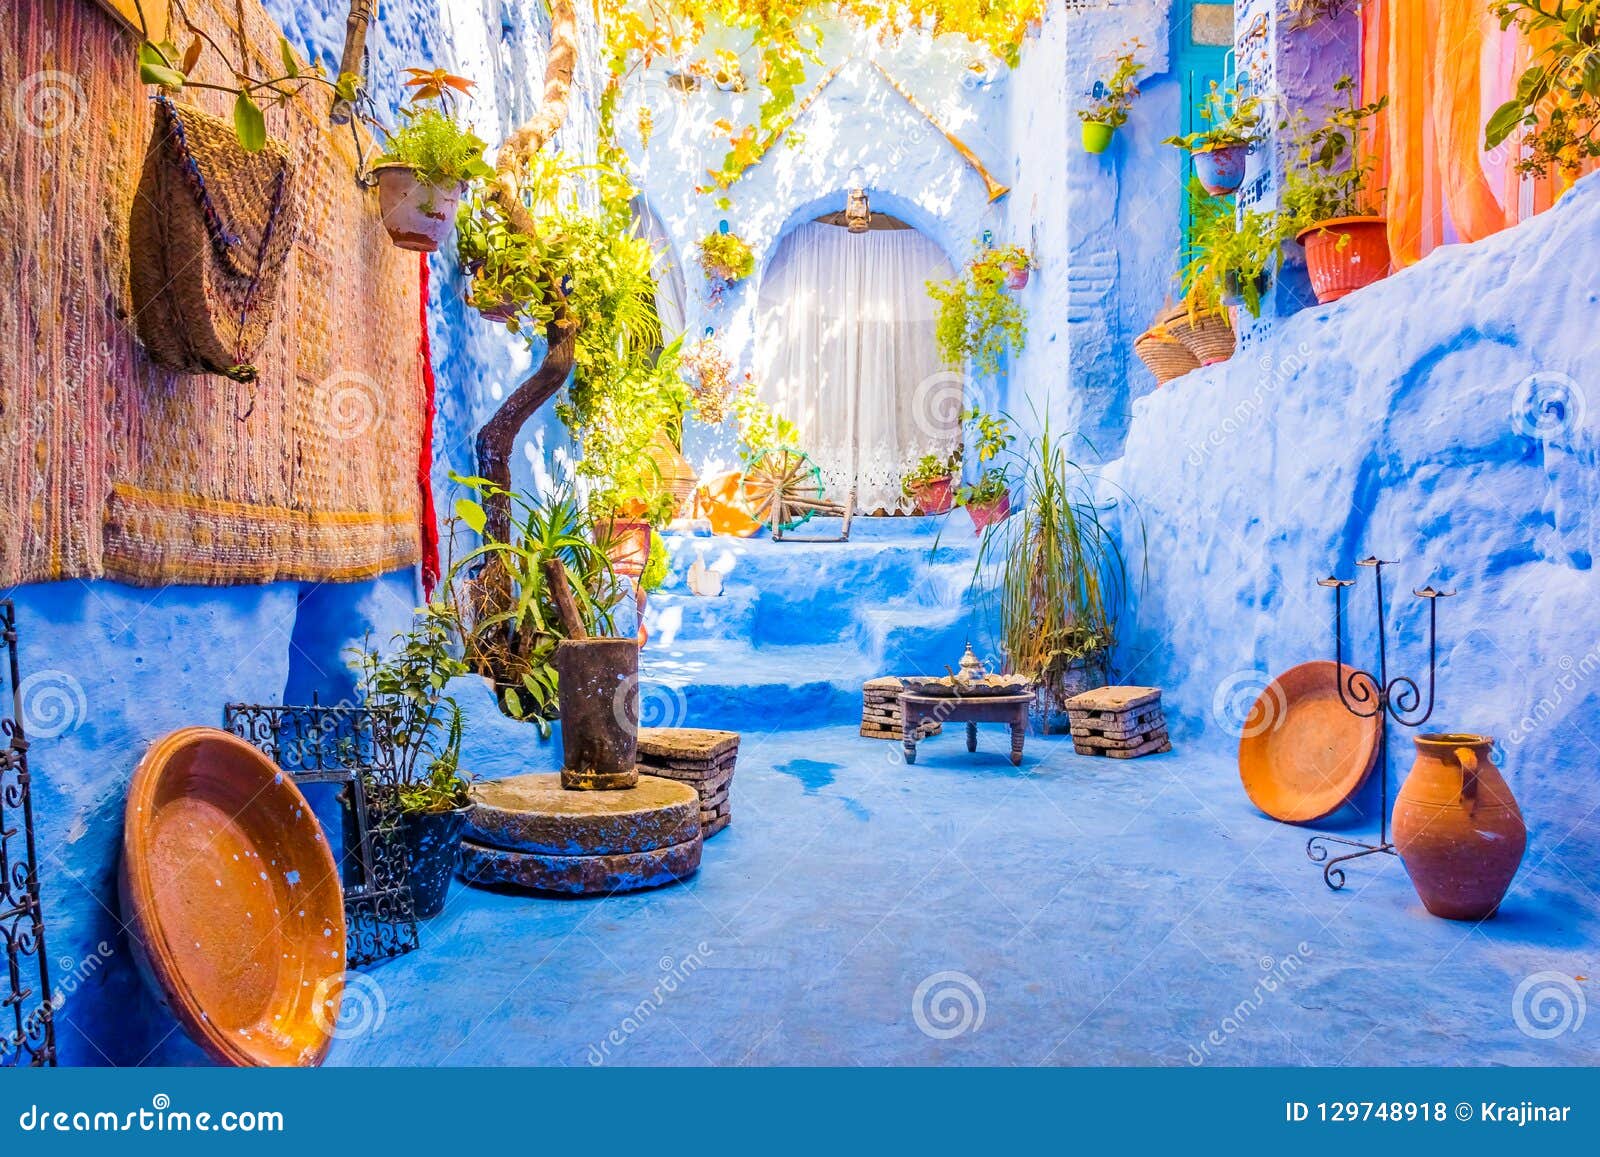 street in blue city medina in chefchaouen, morocco, africa